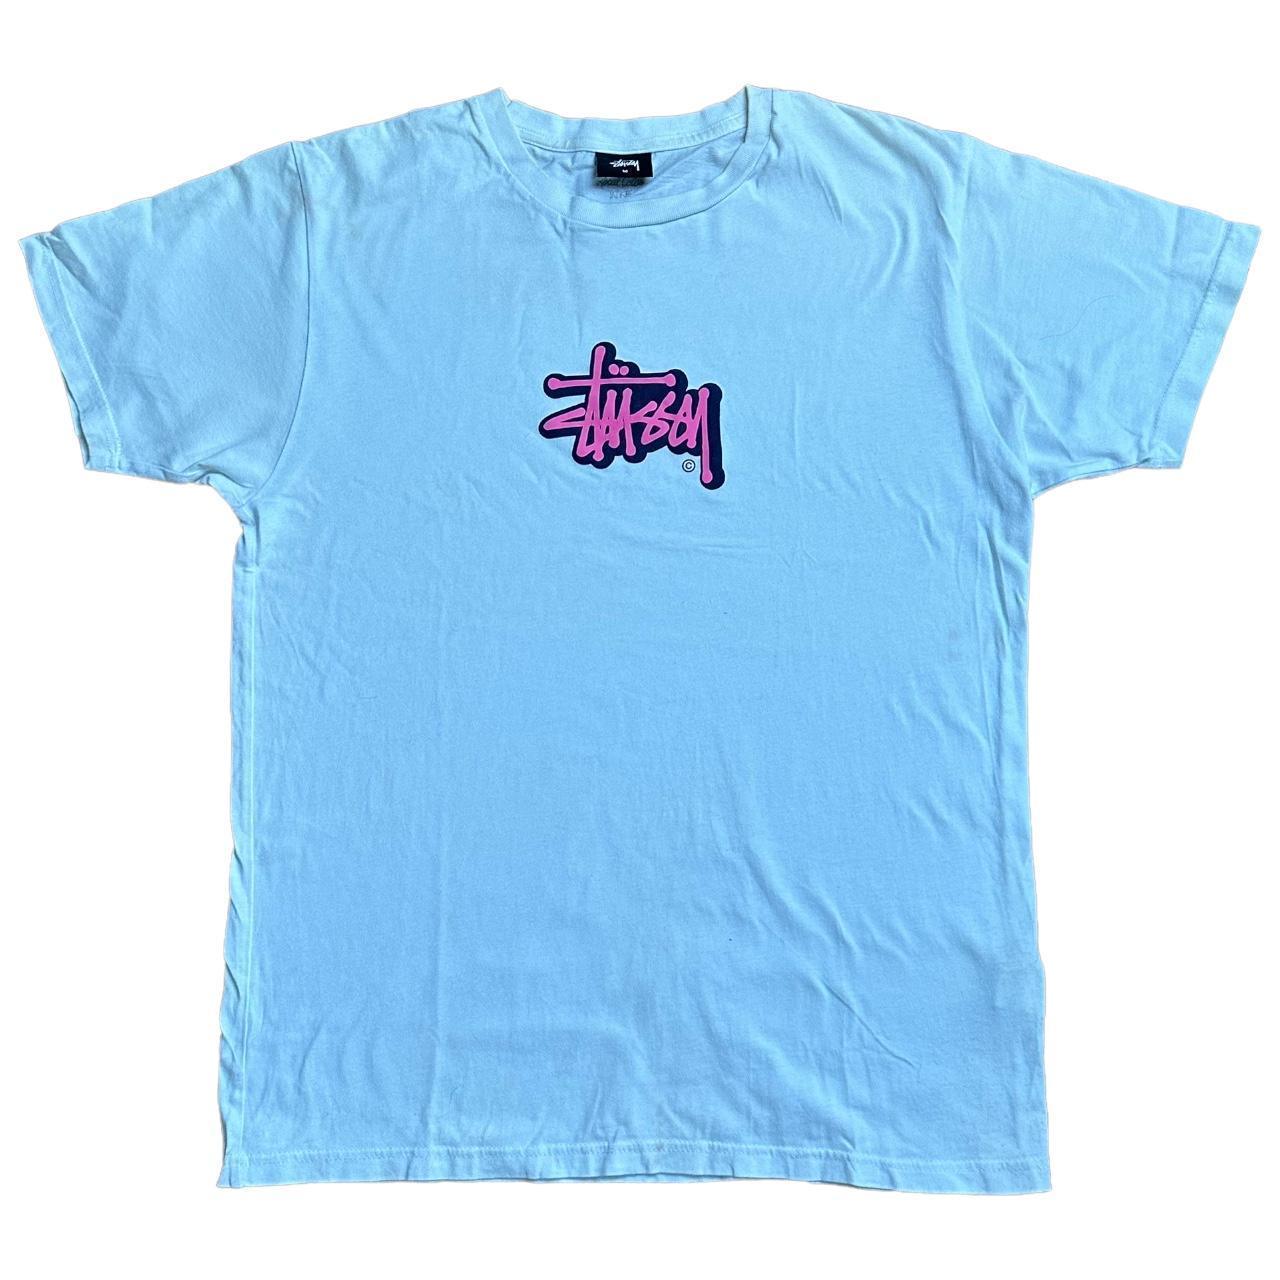 Stussy white and pink T-shirt short sleeve - Known Source